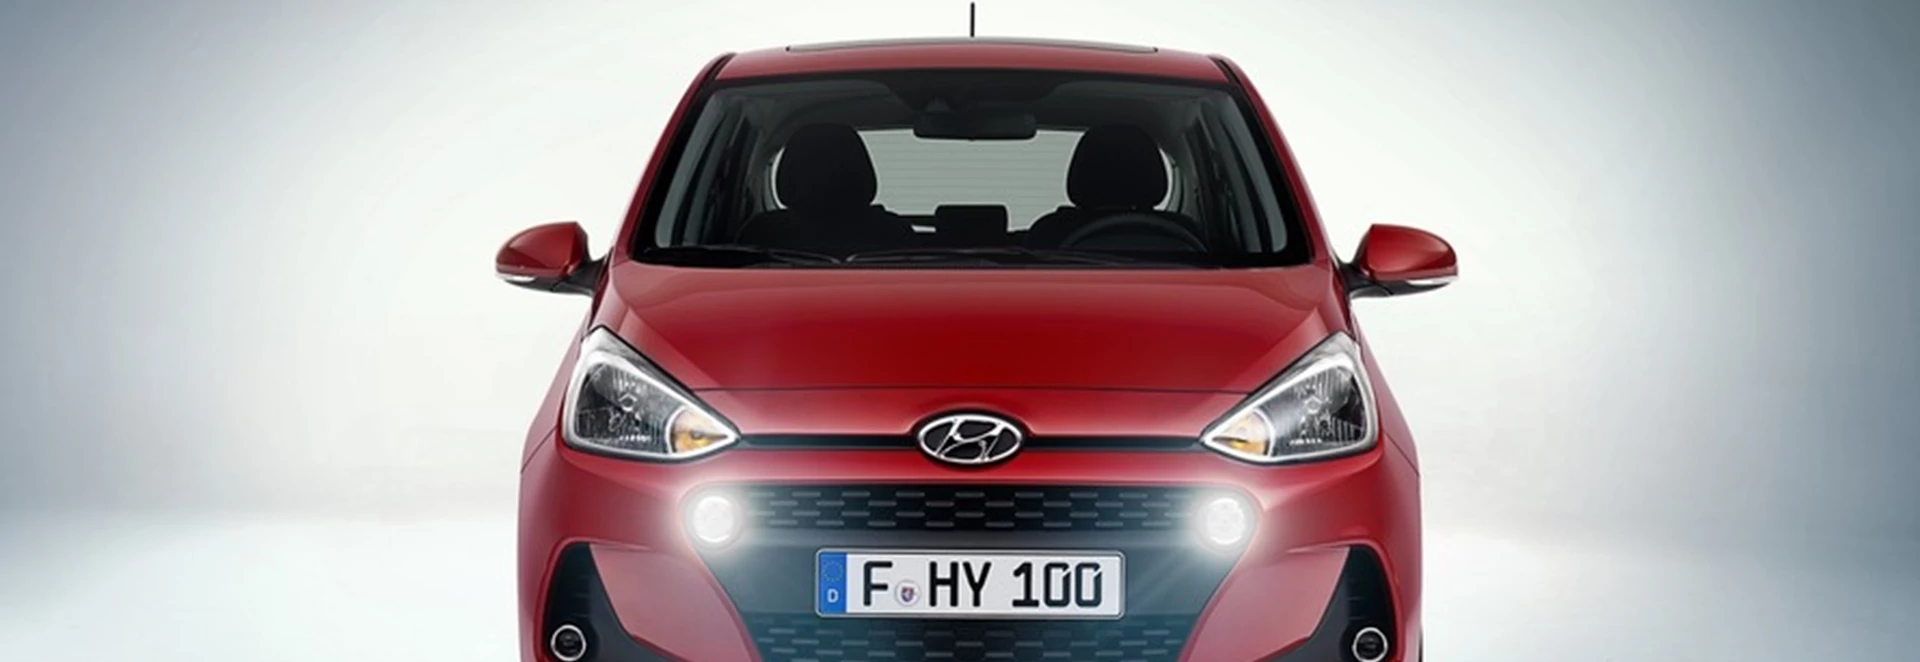 Facelifted Hyundai i10 adds new tech